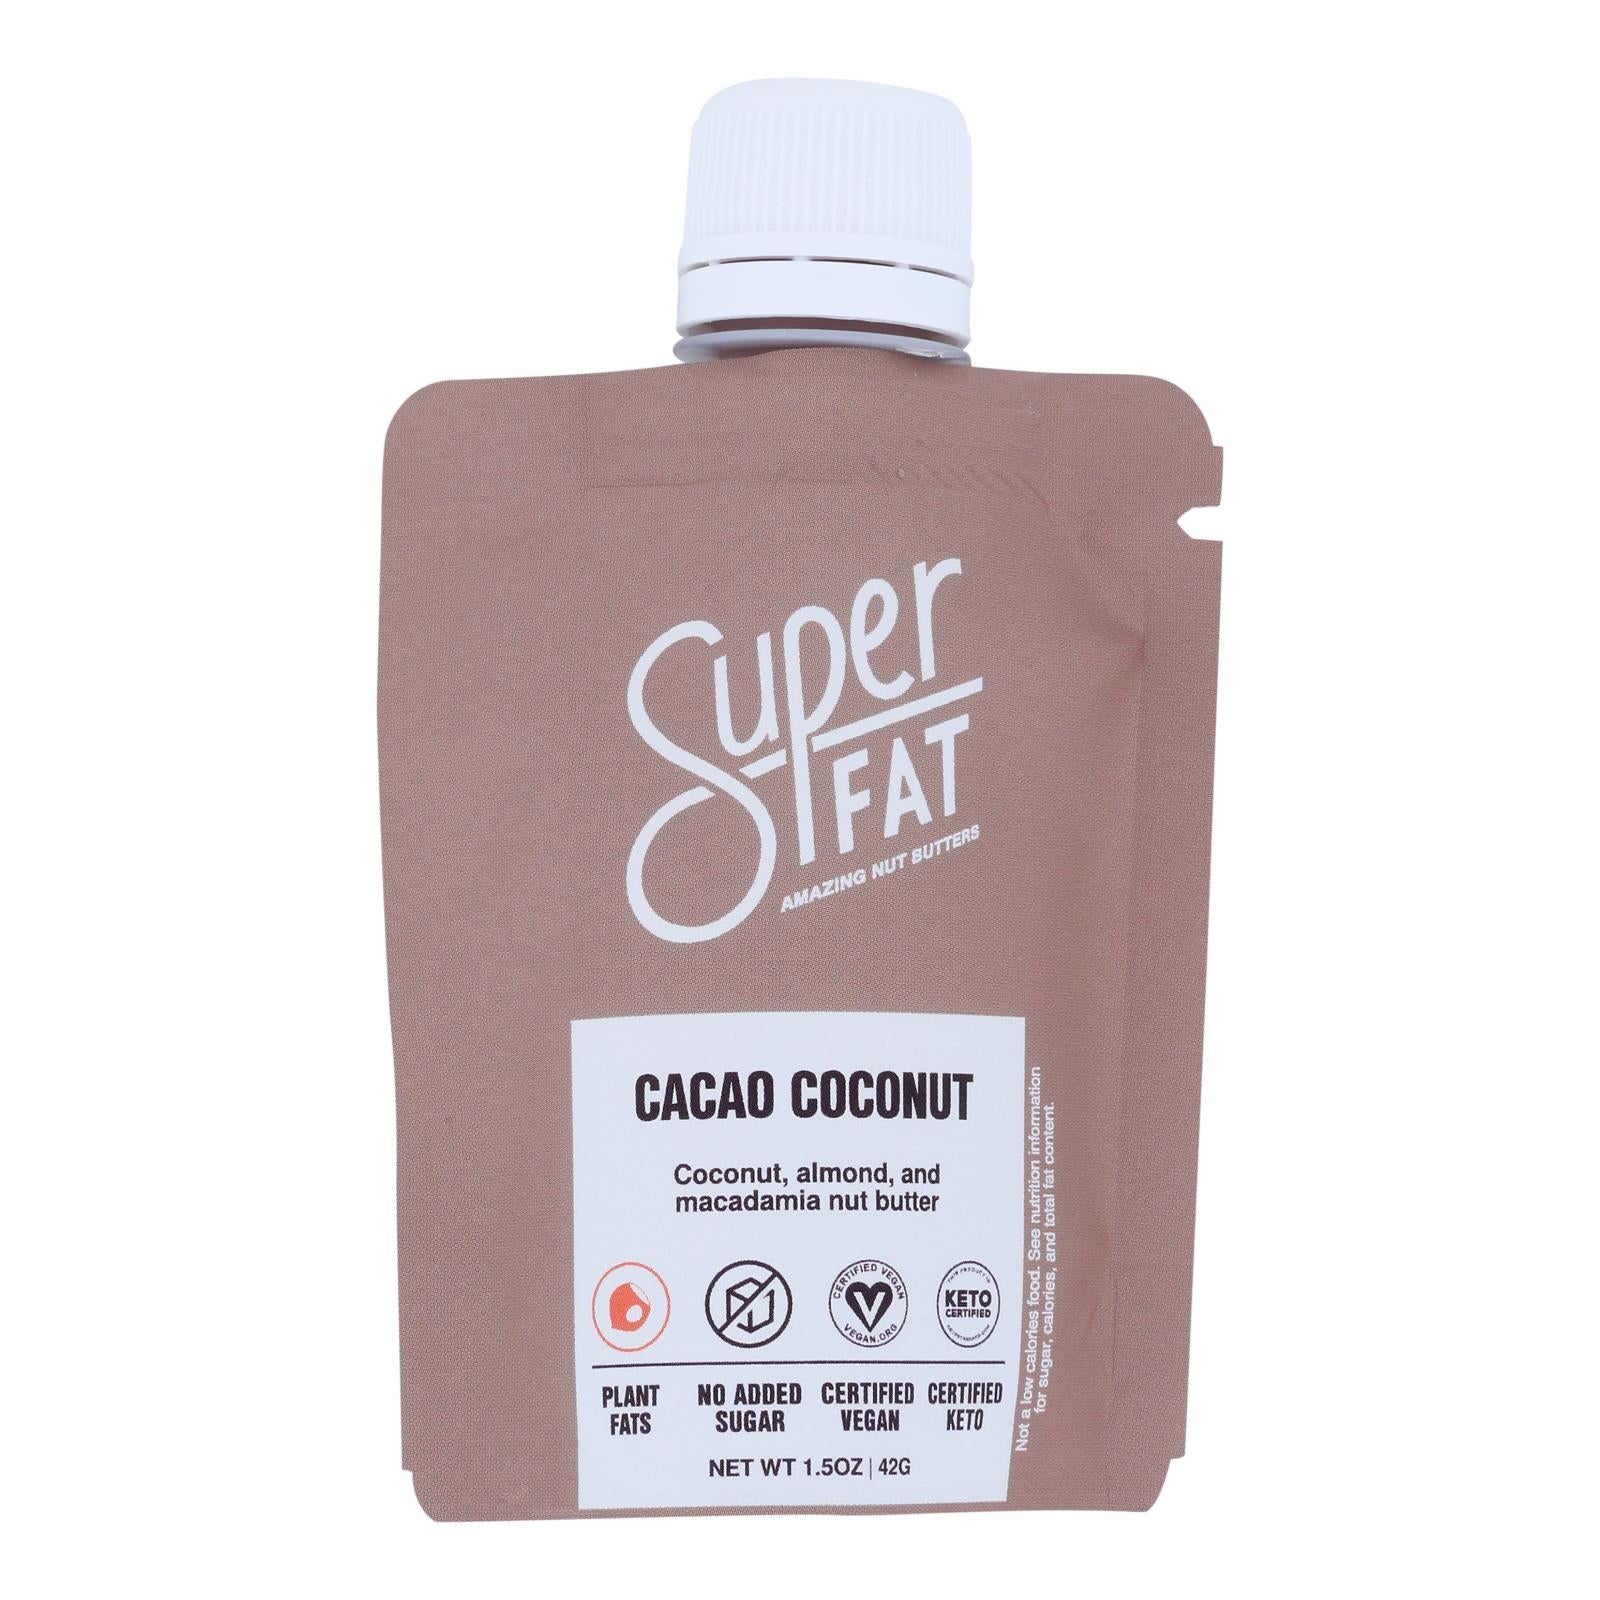 Superfat - Nut Butter Cacao Coconut - Case Of 10 - 1.5 Oz - Whole Green Foods